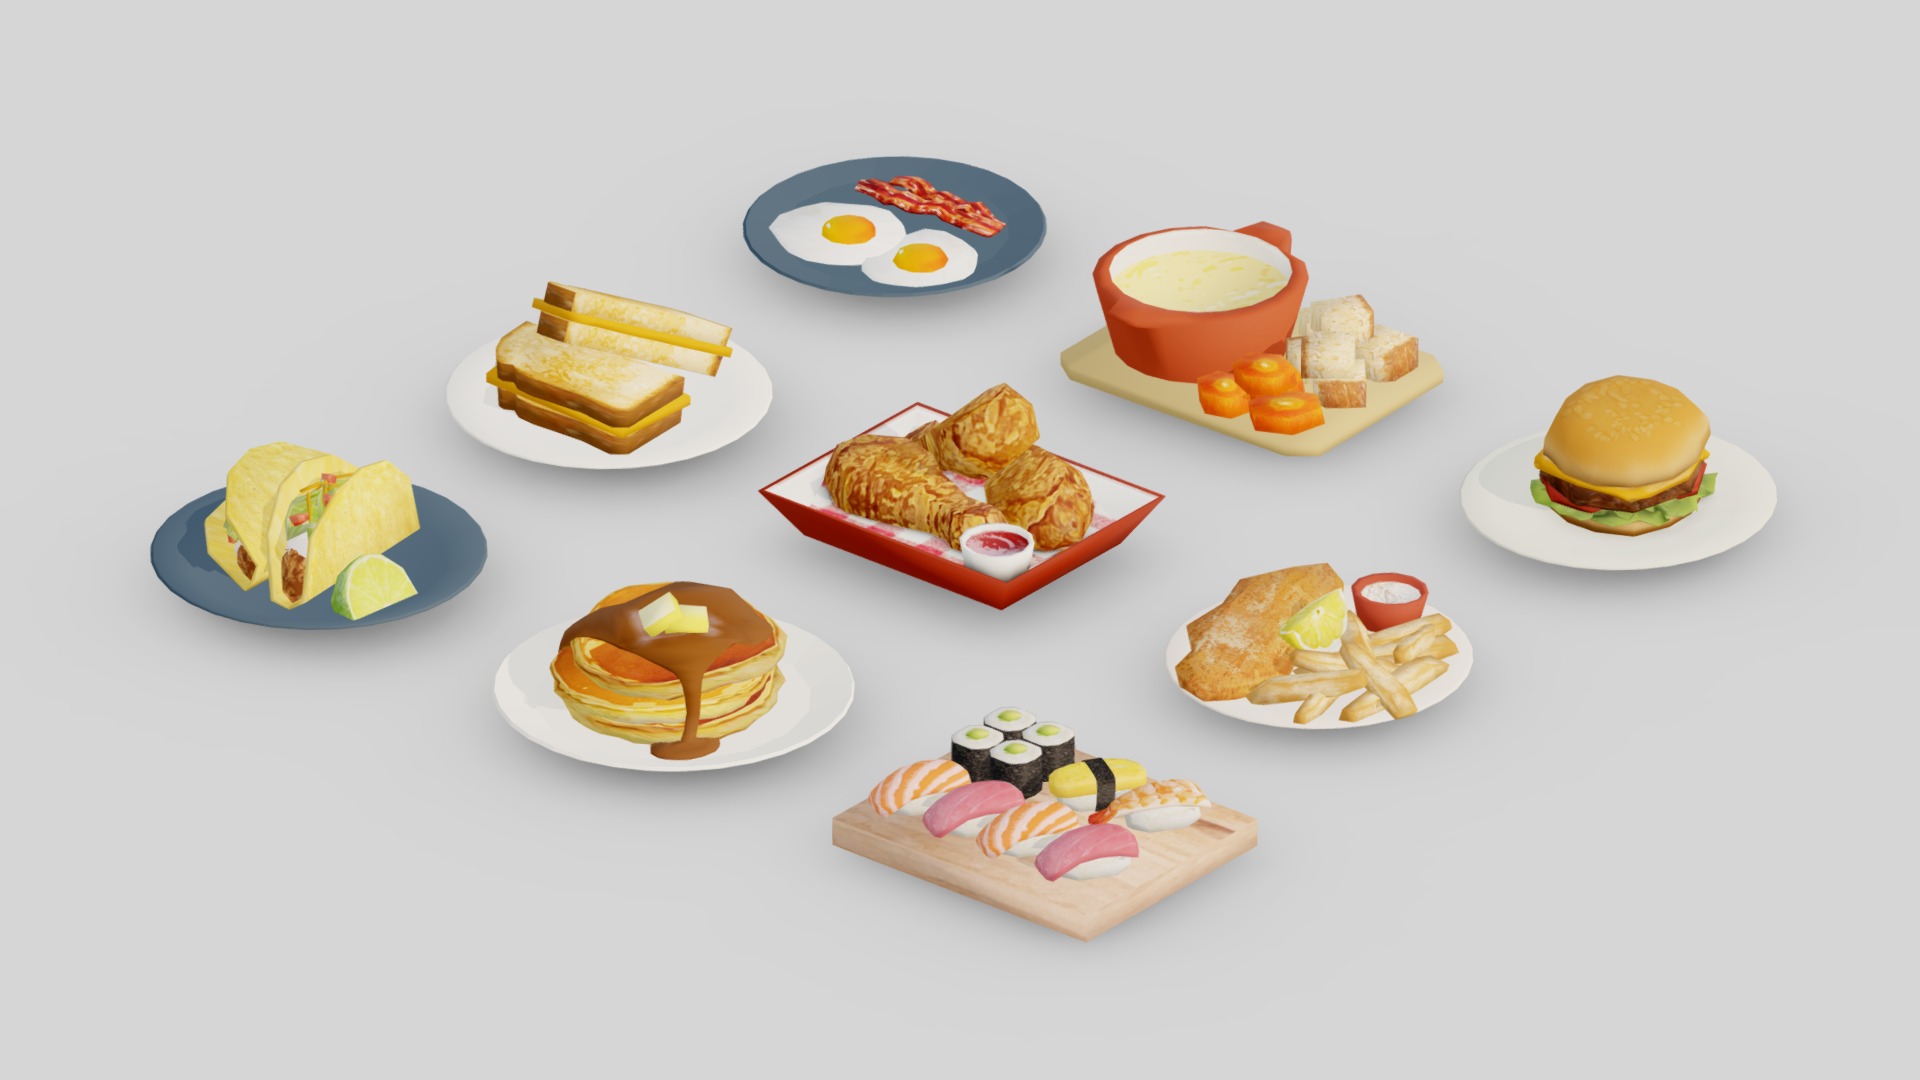 3D model Food Low Poly G04 - This is a 3D model of the Food Low Poly G04. The 3D model is about a group of plates with food on them.